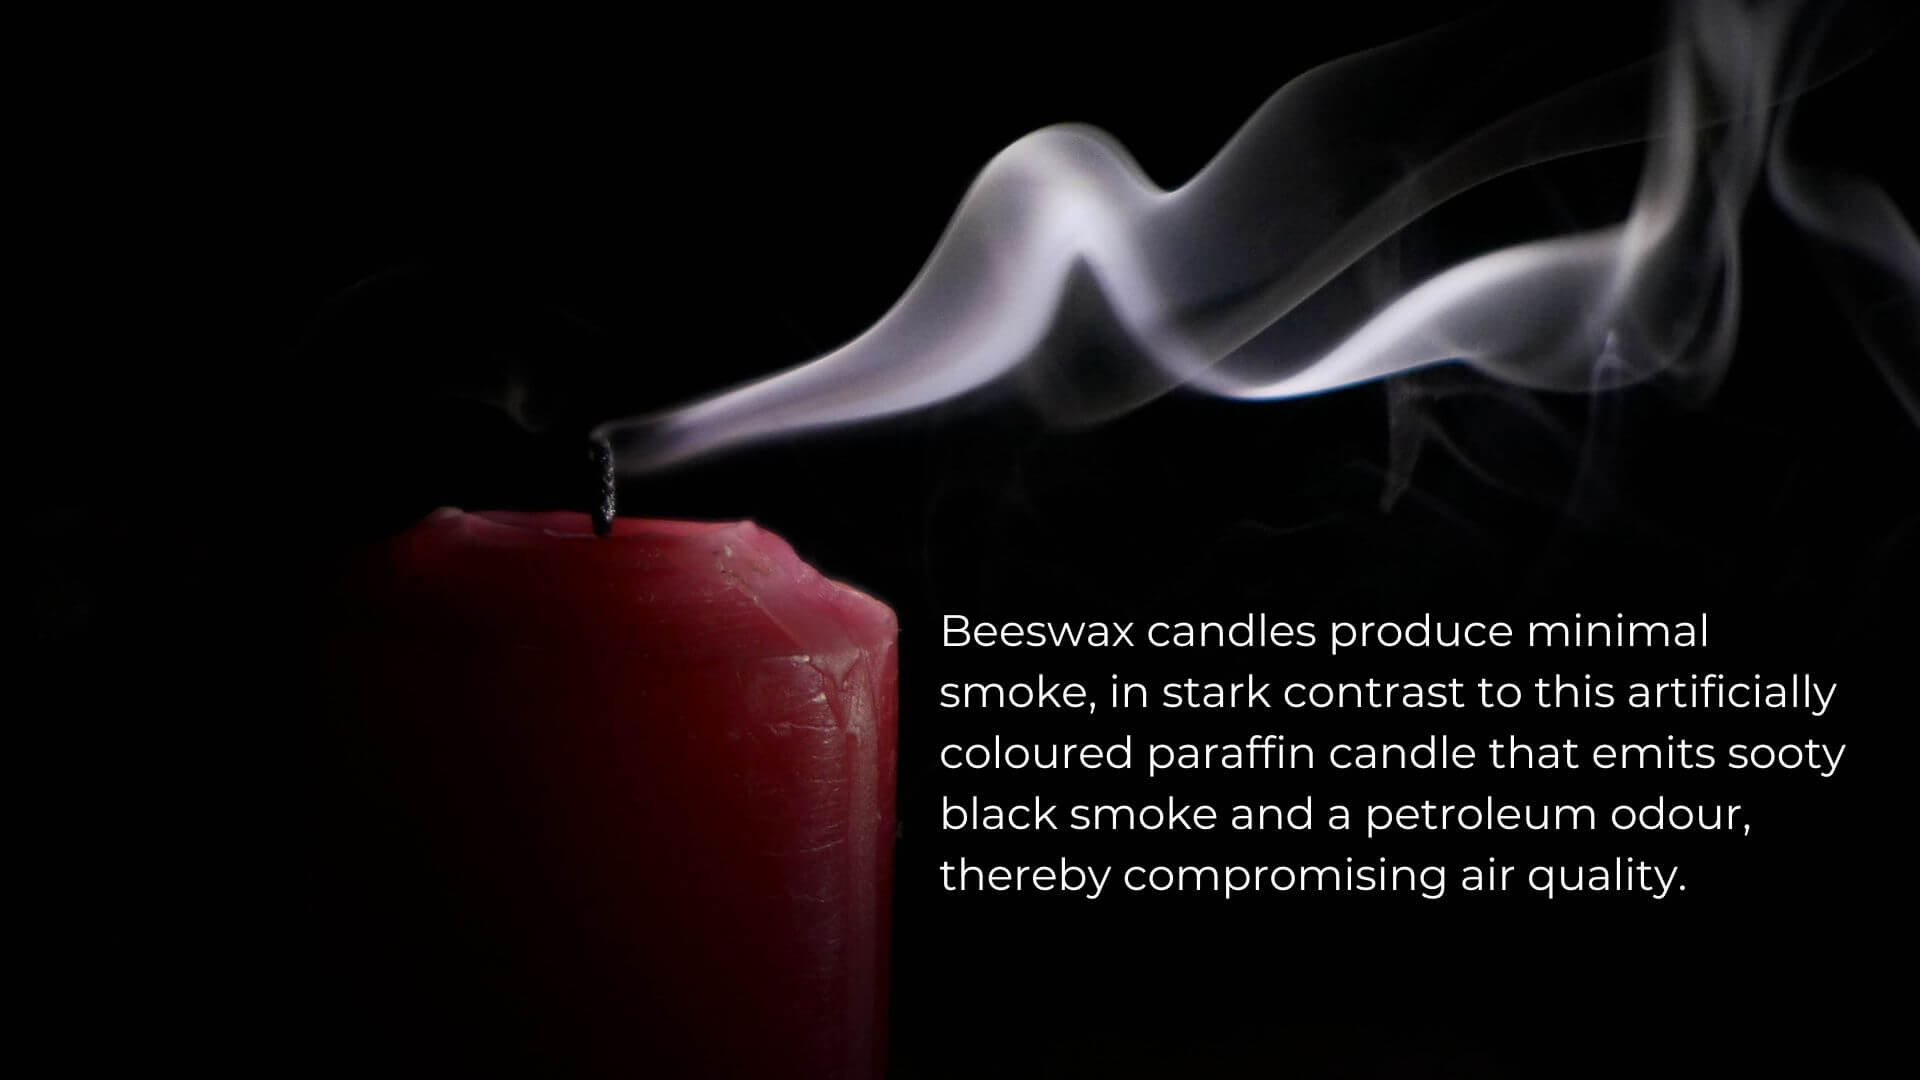 Collombatti Naturals 7 compelling reasons to buy Australian beeswax picture of paraffin candle burning black smoke